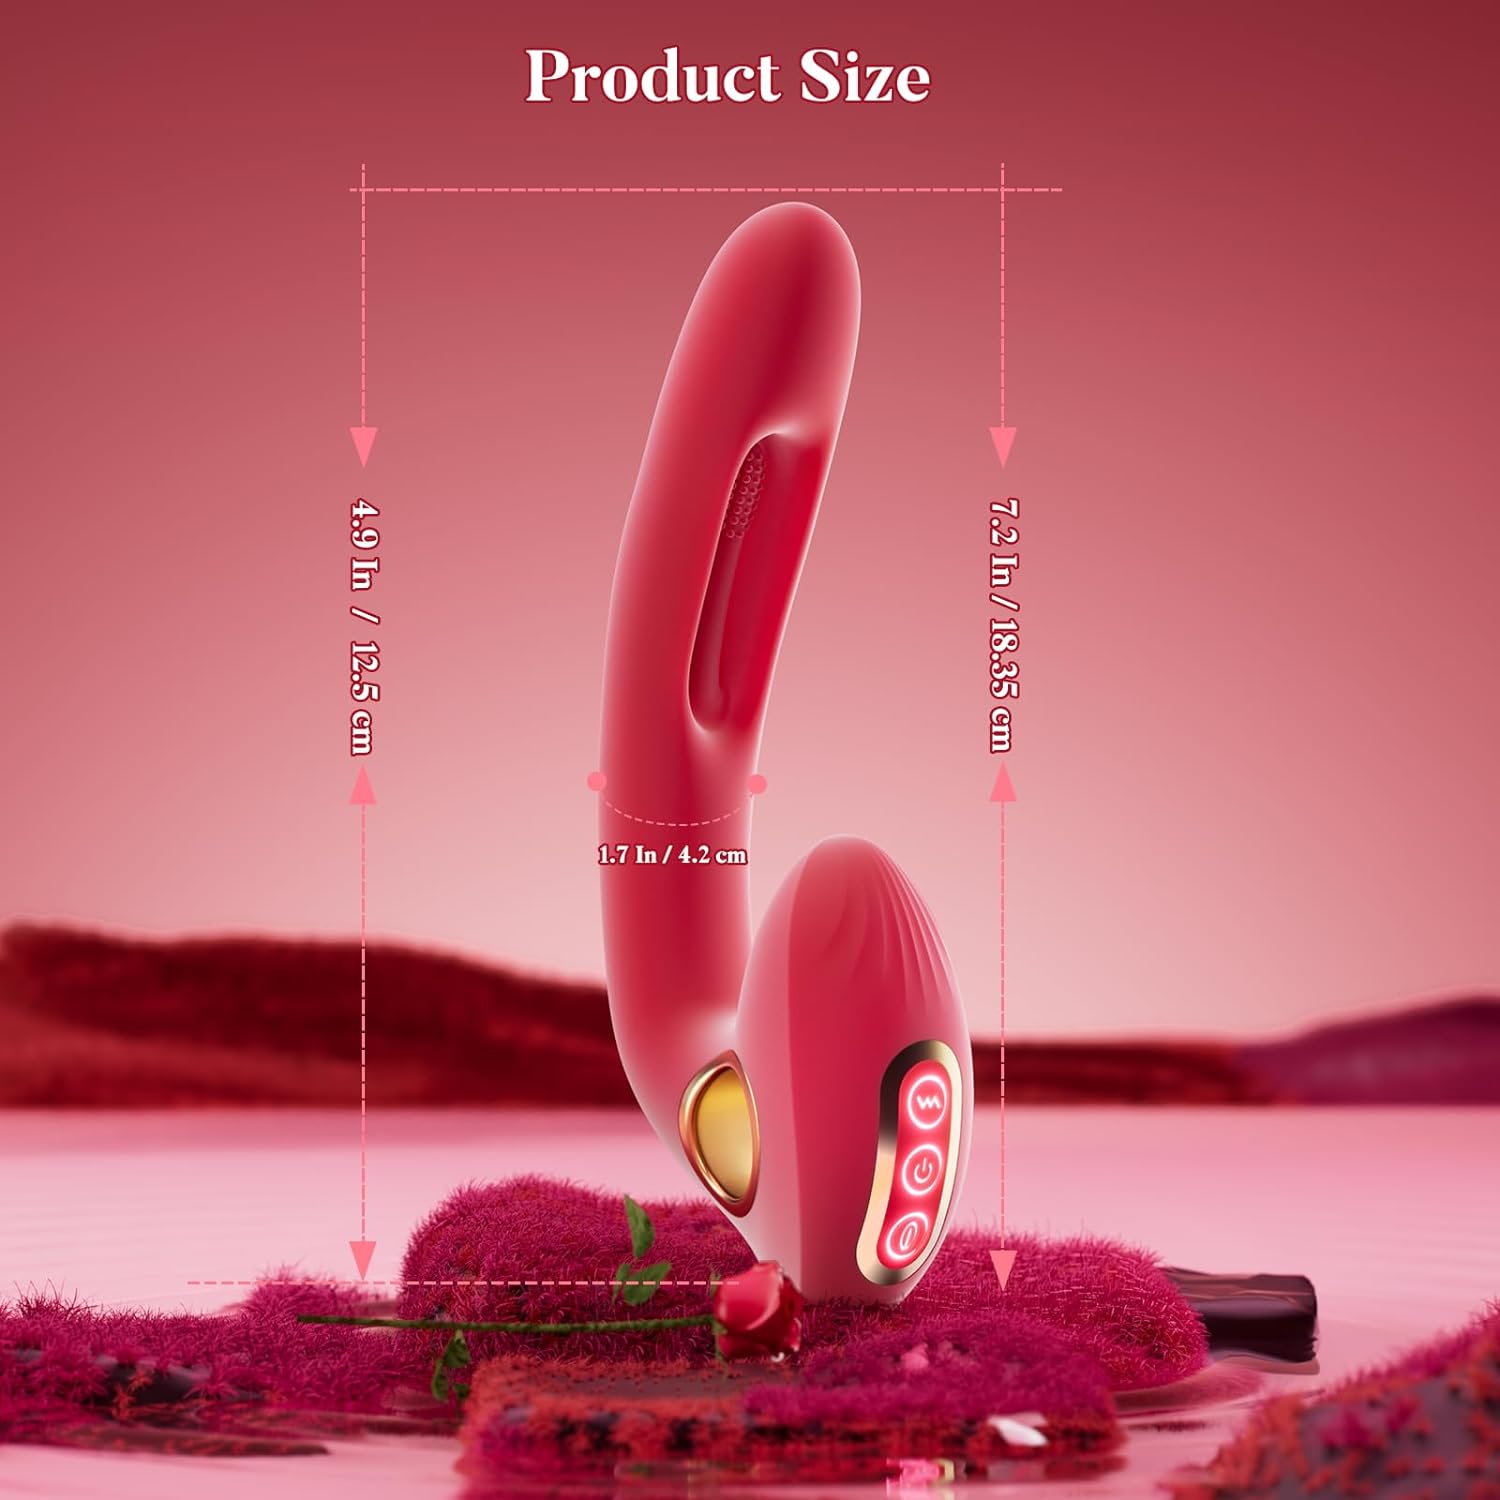 Amara - G Spot Flapping Vibrator with Clitoral Gentle Vibrating Function